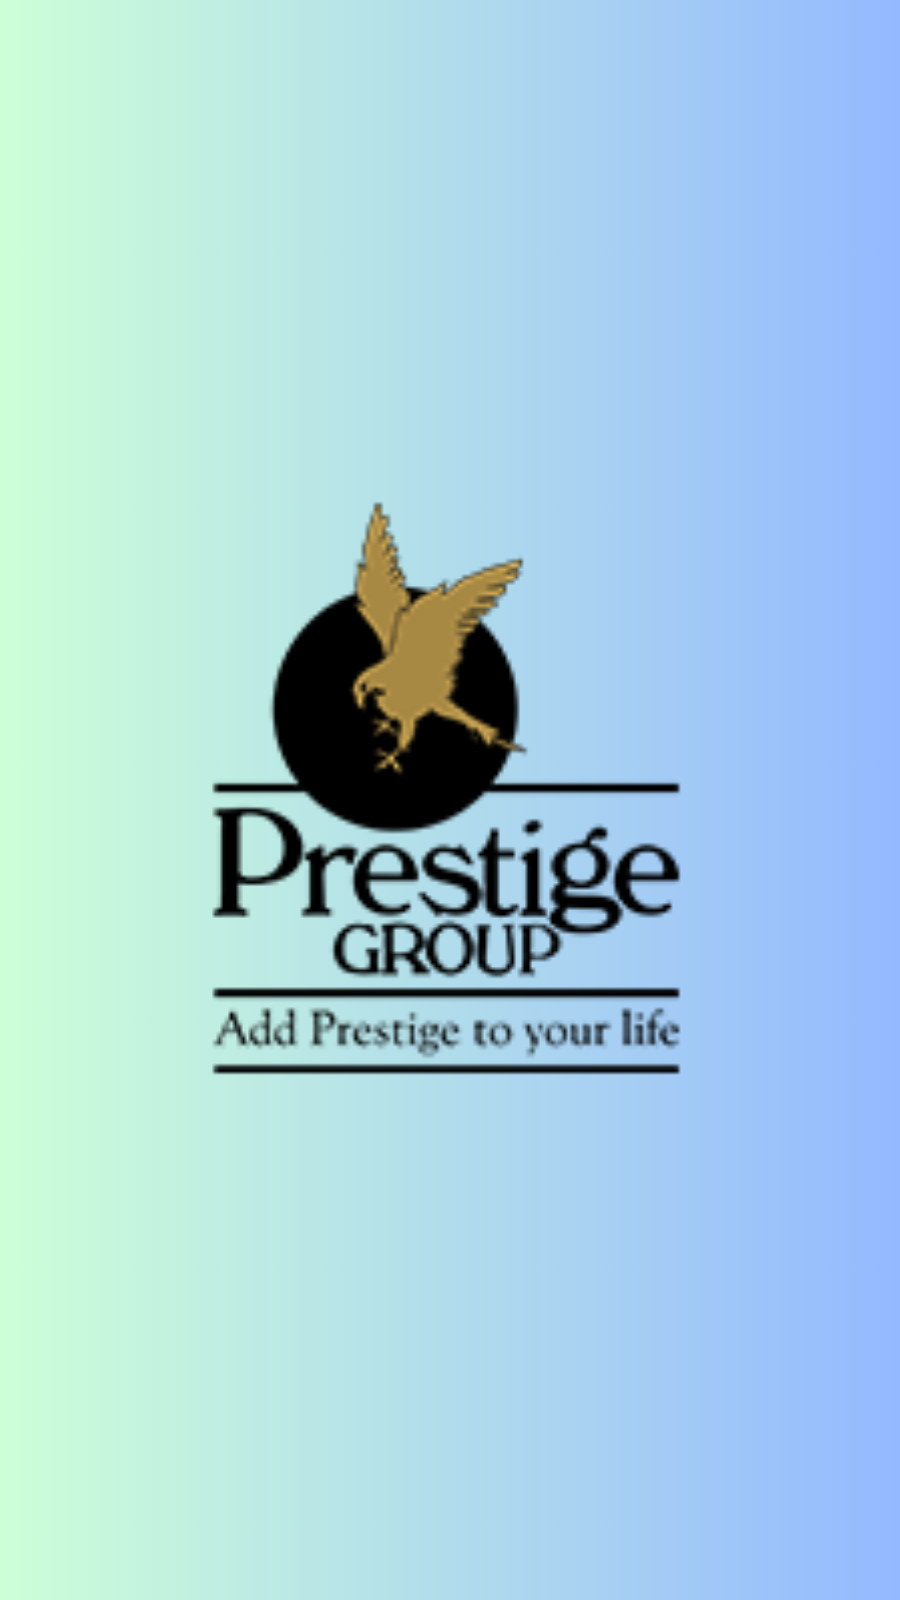 Prestige Group: Prestige Estates reports robust revenue growth on higher  sales, property prices - The Economic Times